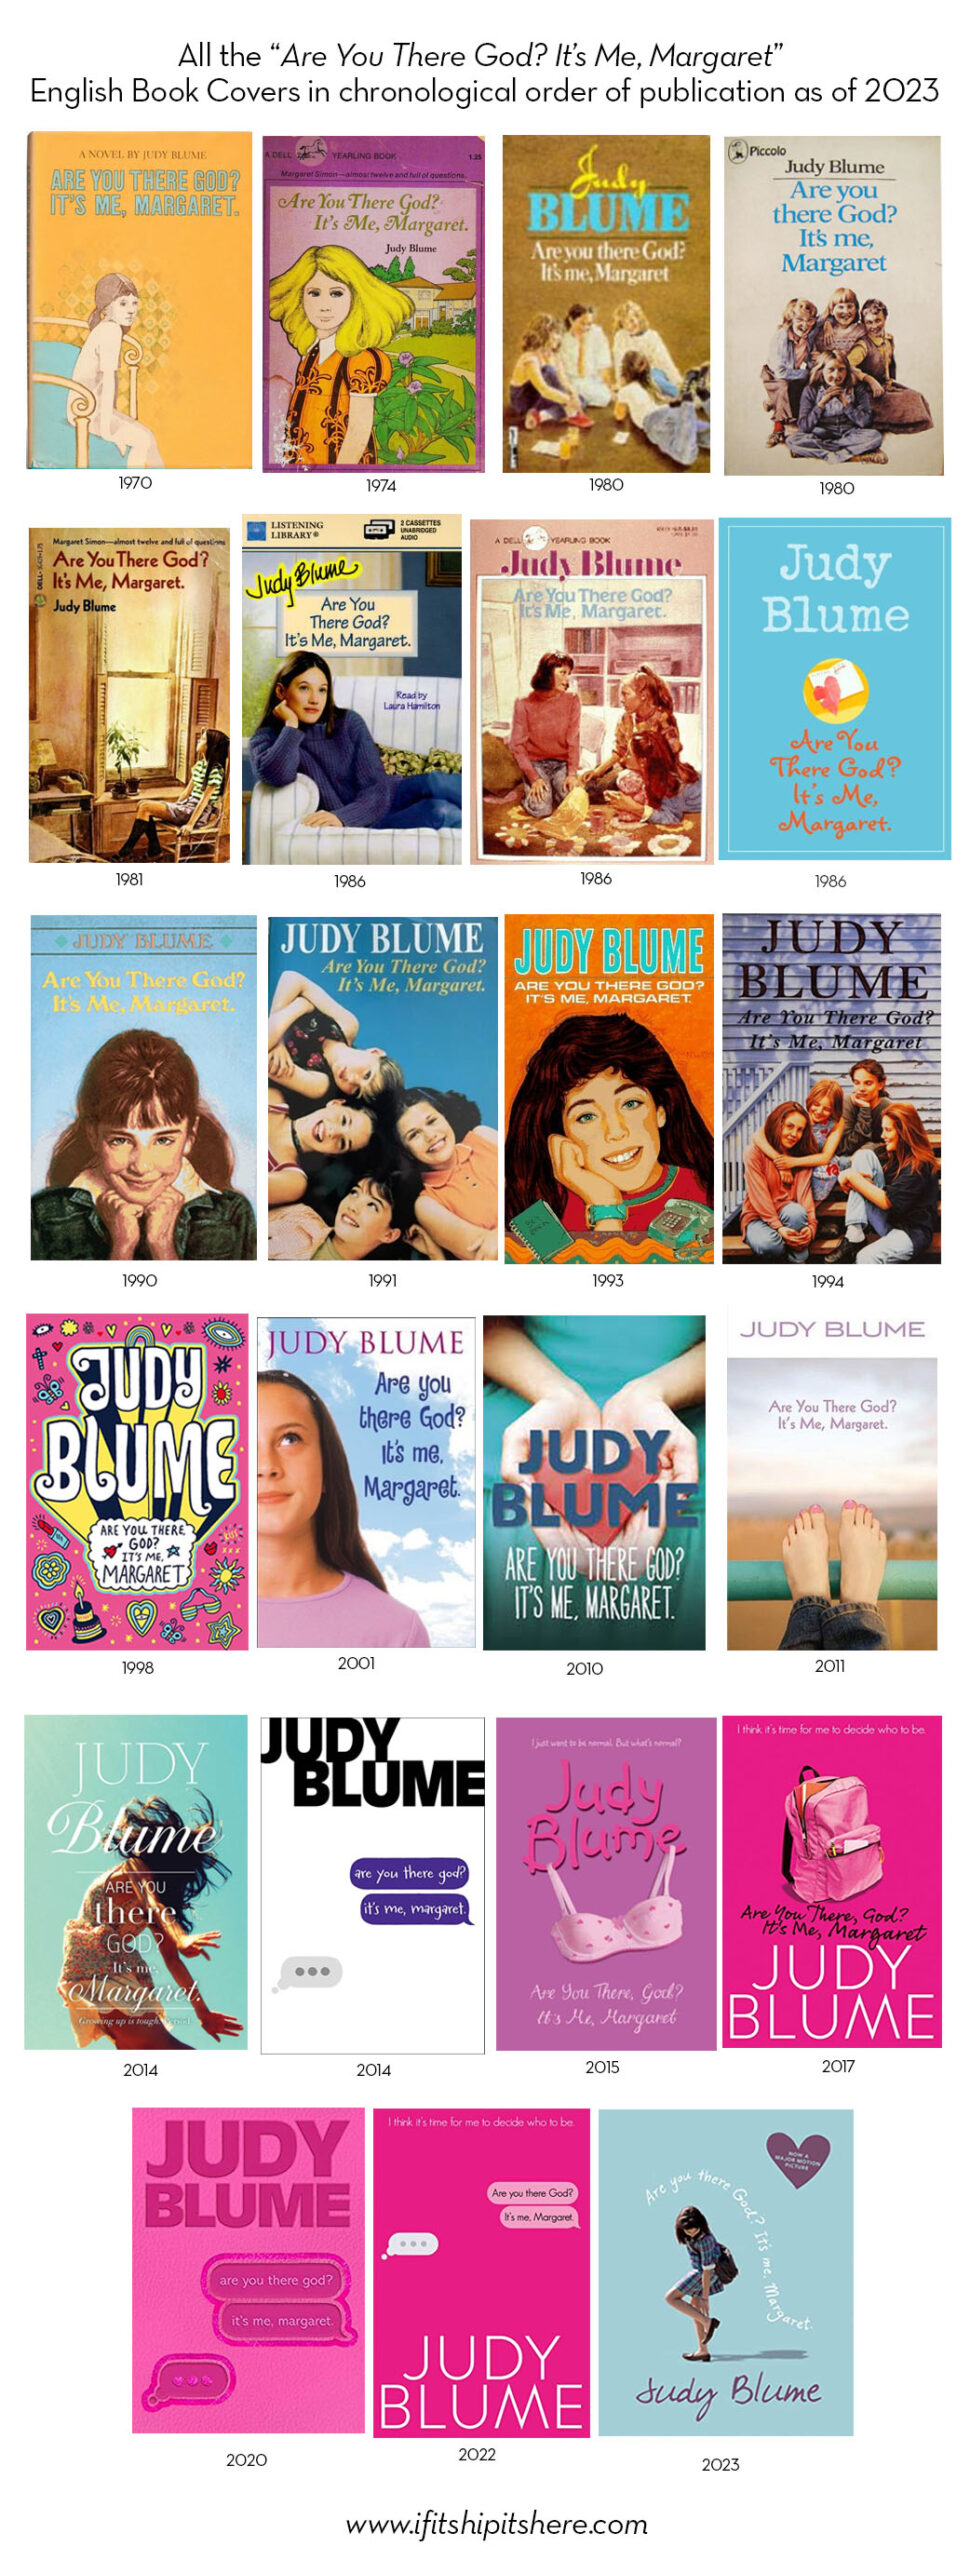 judy blume are you there god it's me margaret book covers